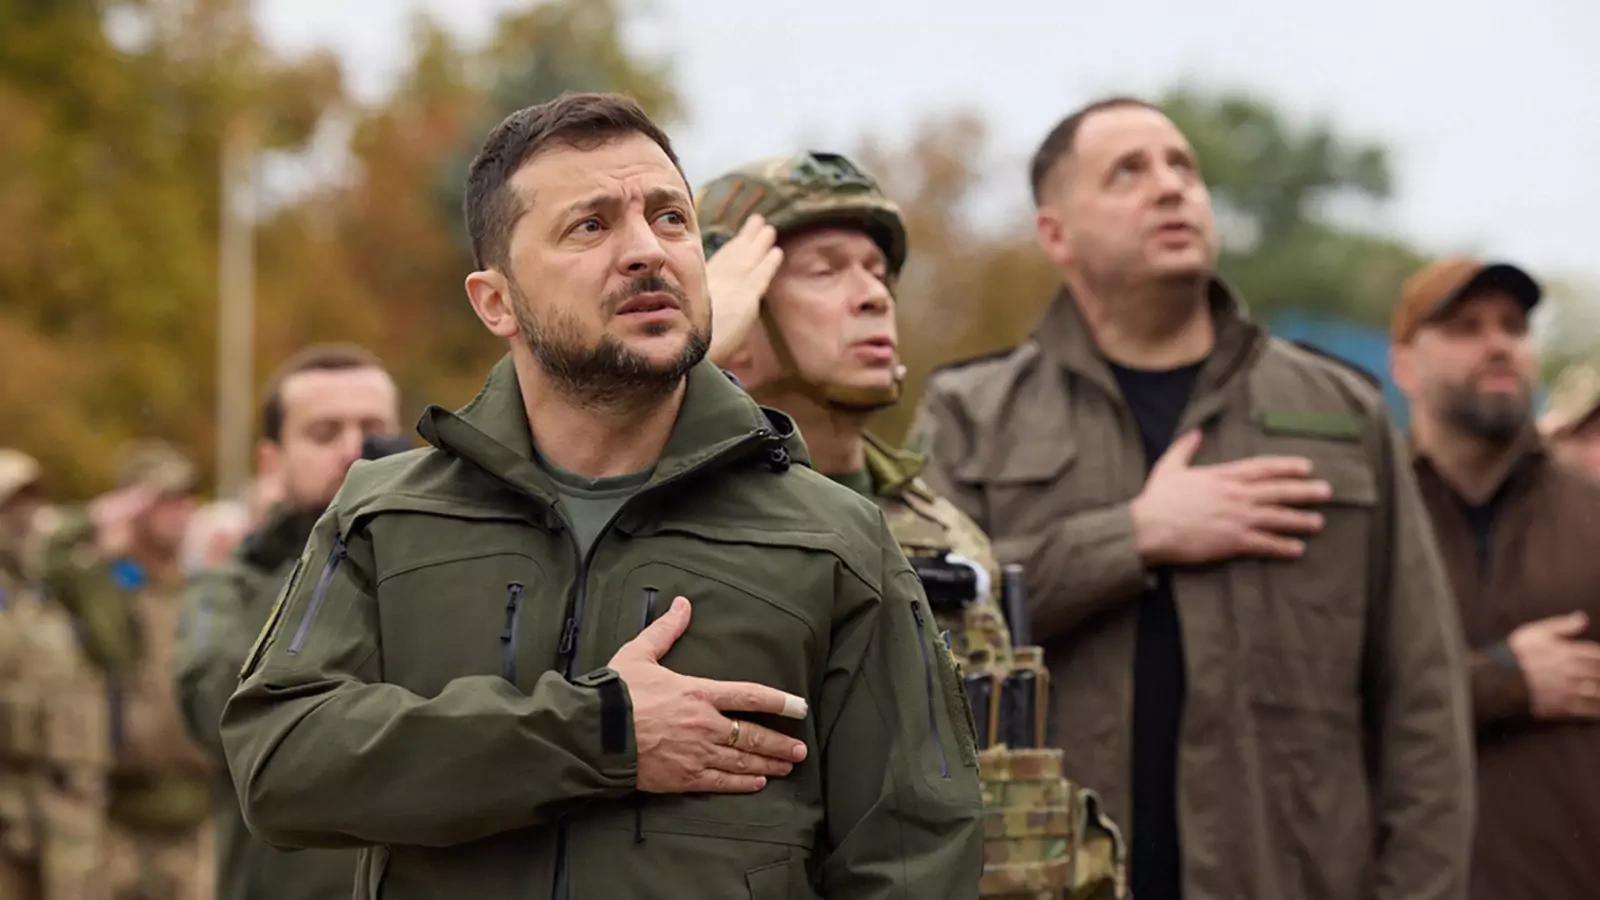 Ukraine's President Zelensky sings a national anthem on September 14, 2022 during a flag rising ceremony in the recently liberated town of Izium in the Kharkiv region.